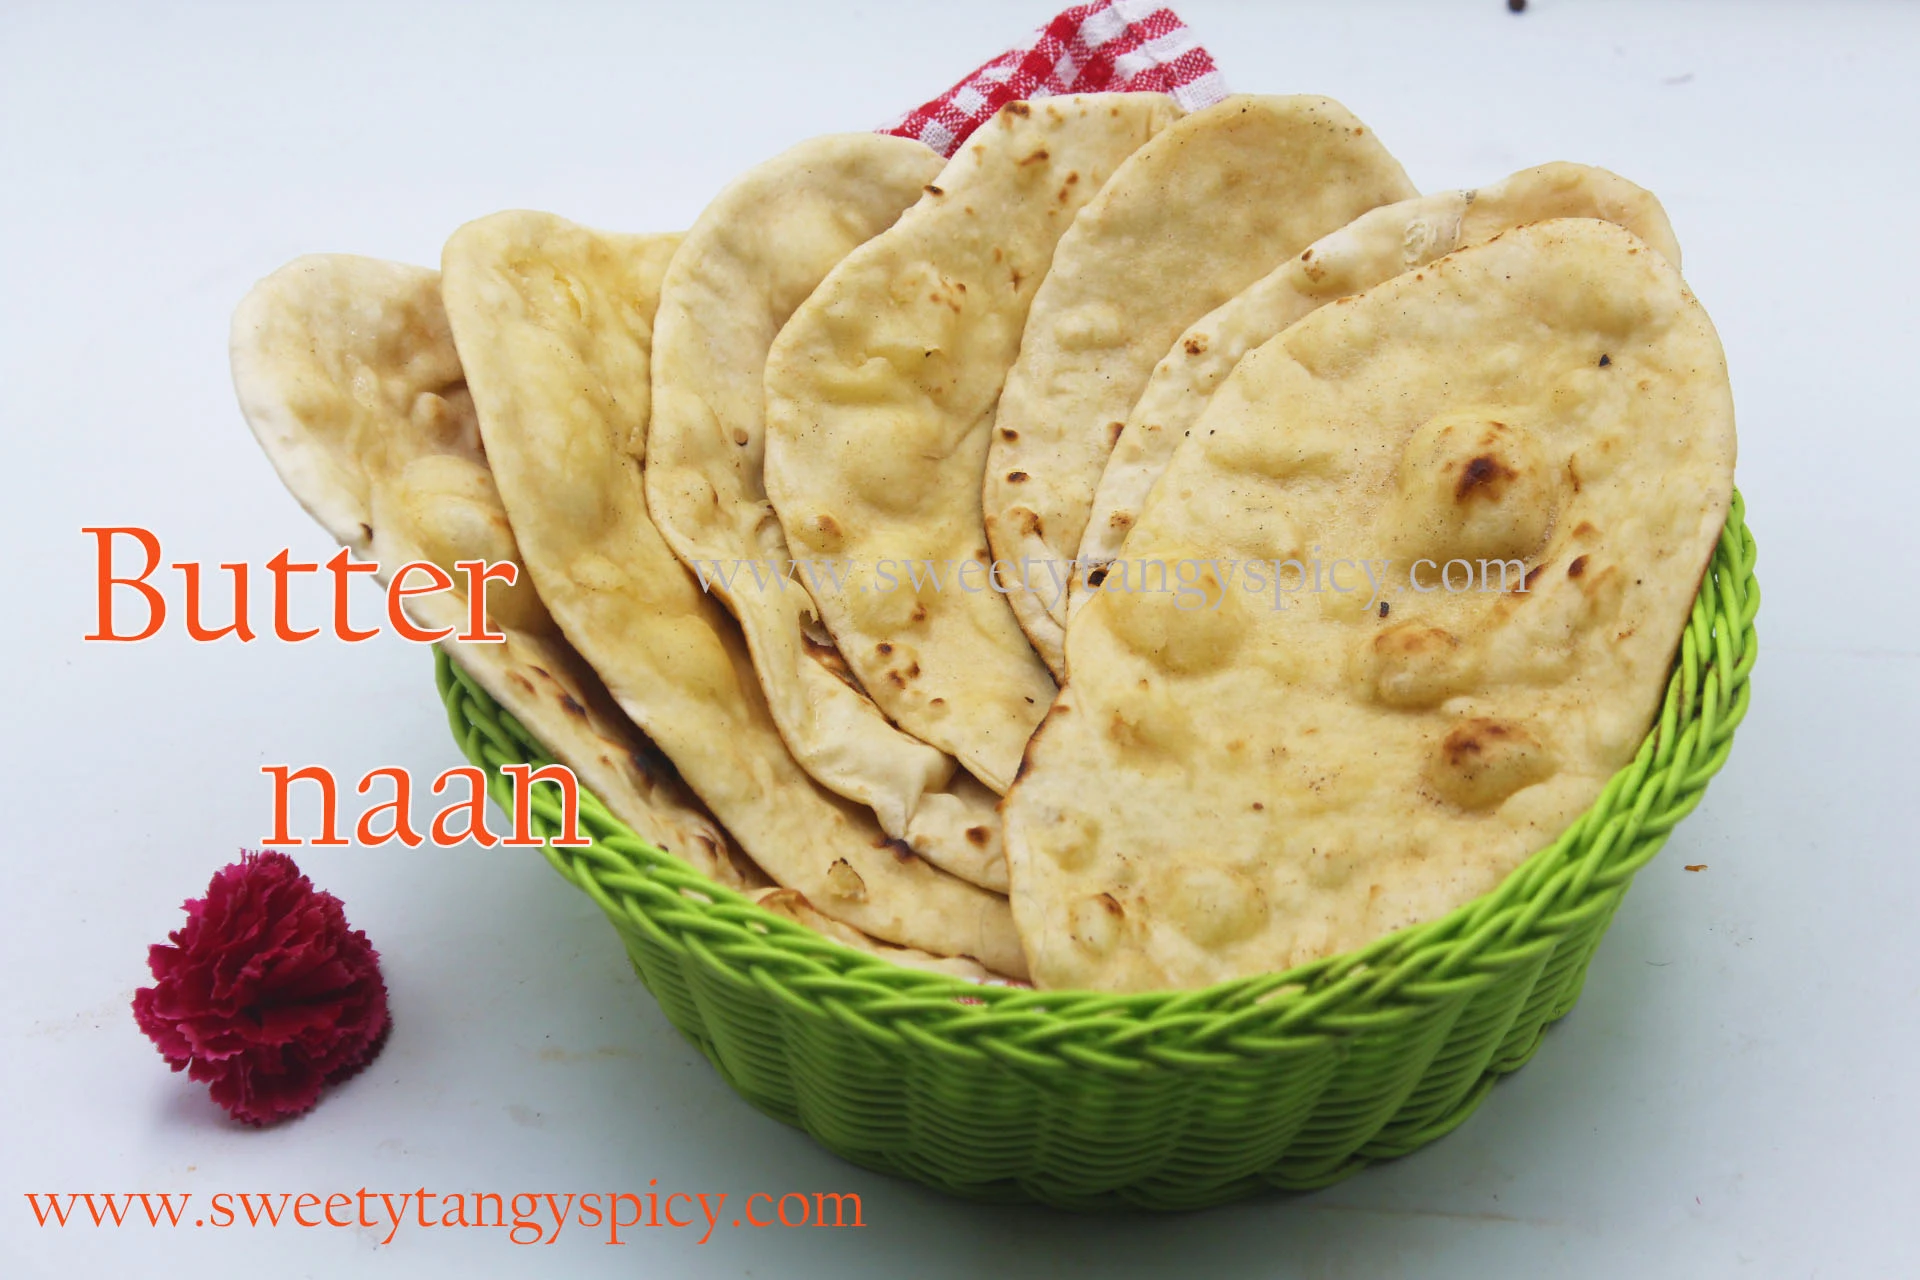 Butter Naan presented in a Green-Colored Plastic Basket